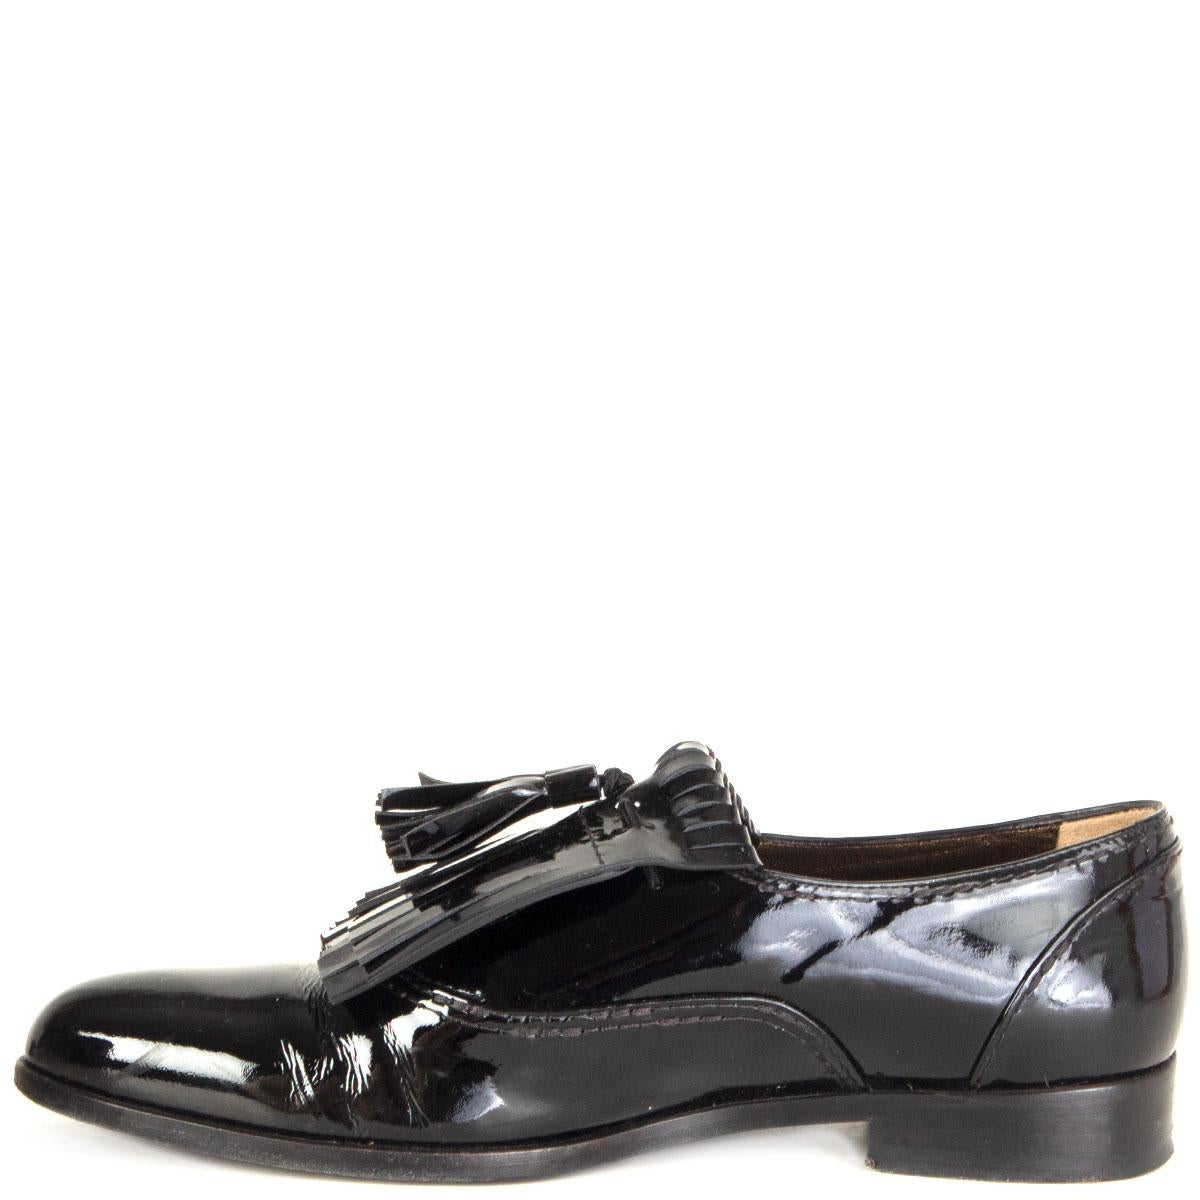 black patent leather flat shoes